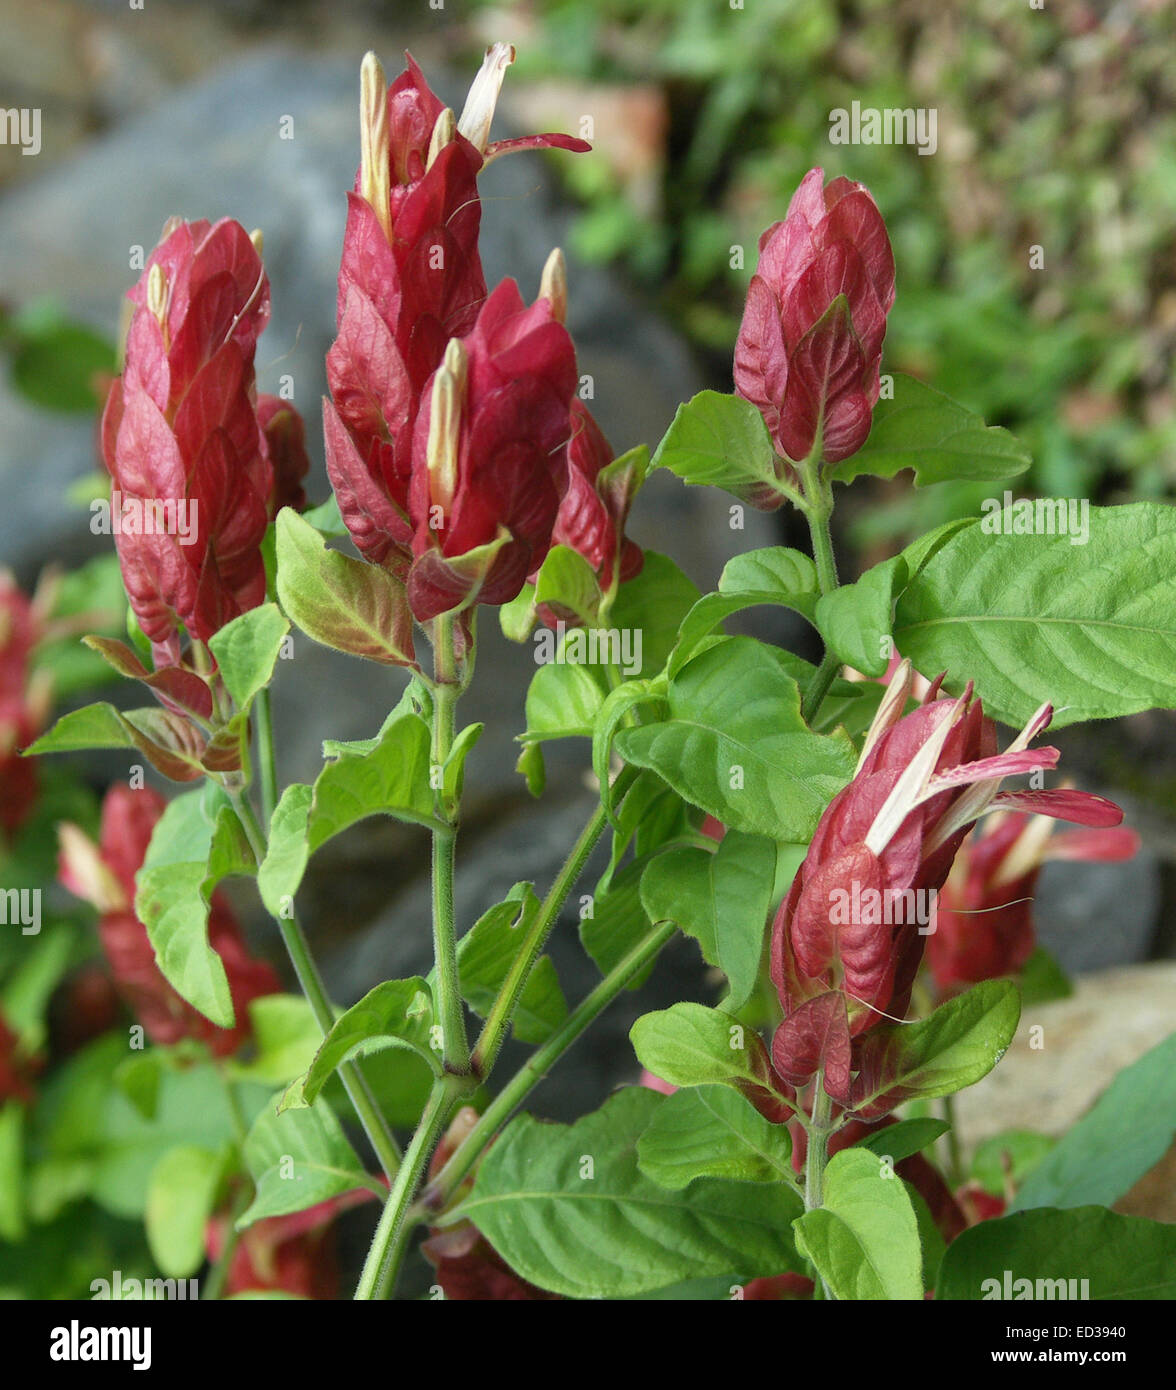 Cluster of bright red bracts, white flowers & emerald leaves of Mexican Shrimp Plant, Justicia brandegeeana / Beloperone guttata Stock Photo